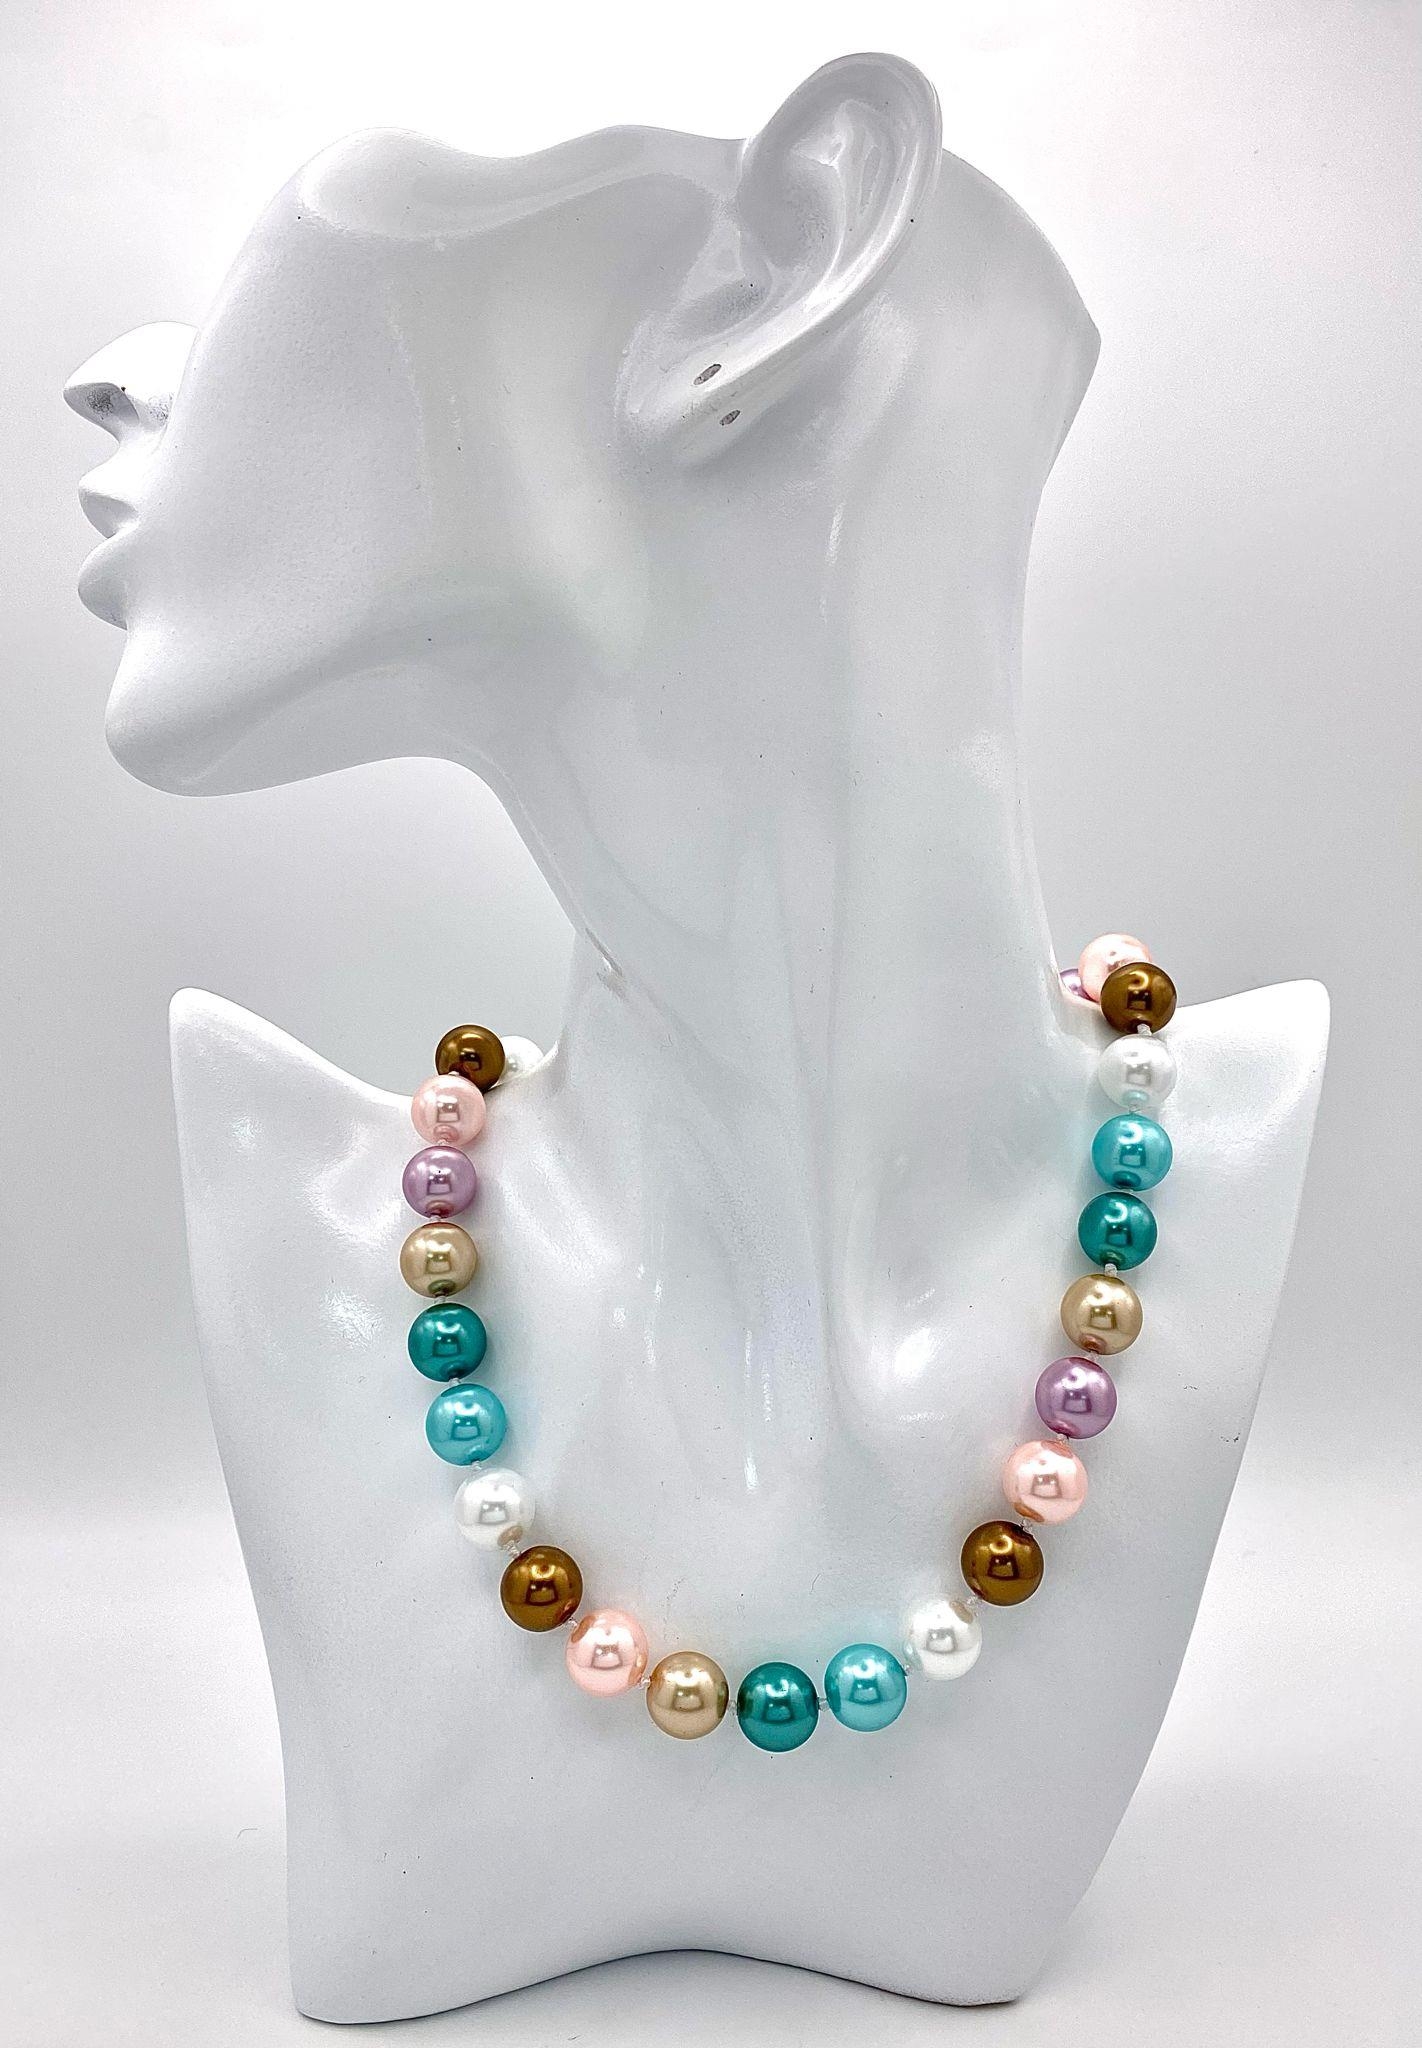 A Vibrant Multi-Coloured South Sea Pearl Shell Bead Necklace. 12mm beads. 42cm necklace length.